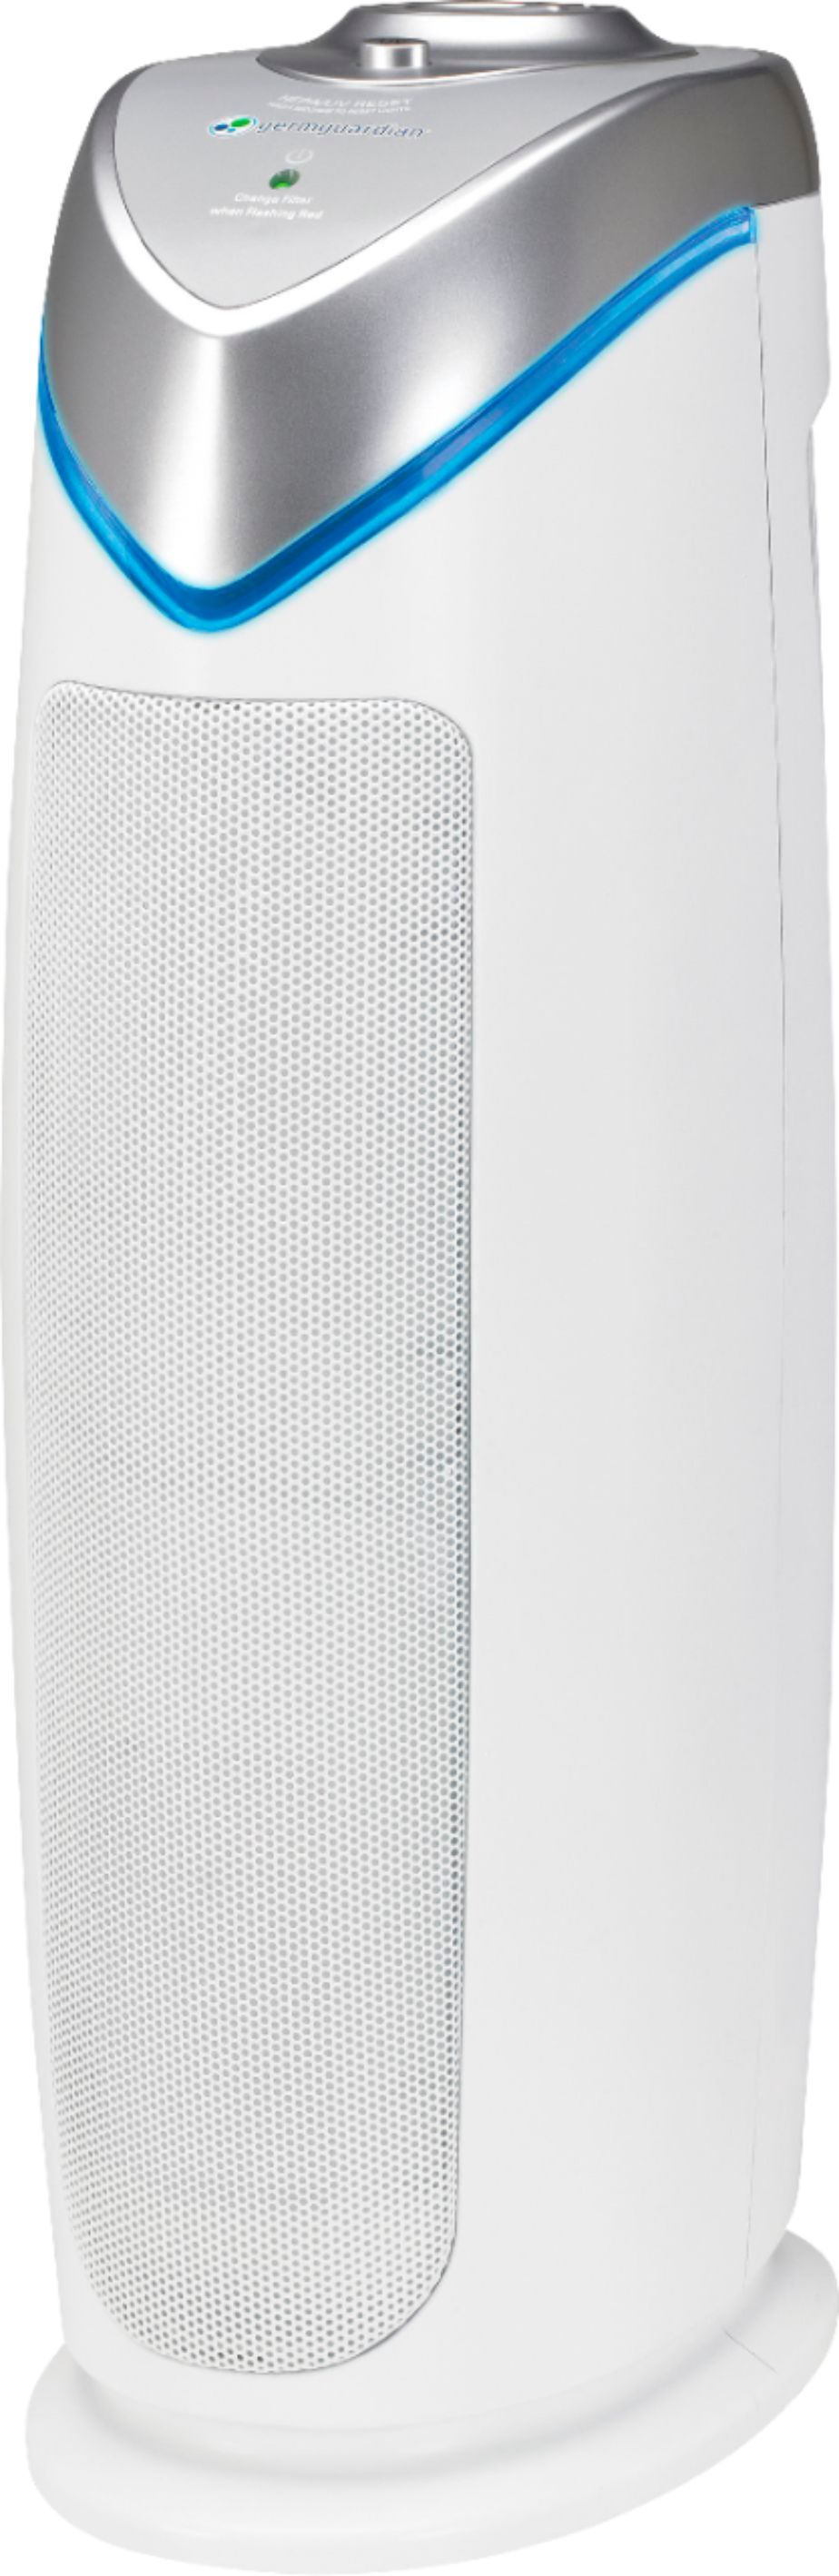 Angle View: GermGuardian - 167 Sq Ft 4-in-1 True HEPA Air Purifier - White